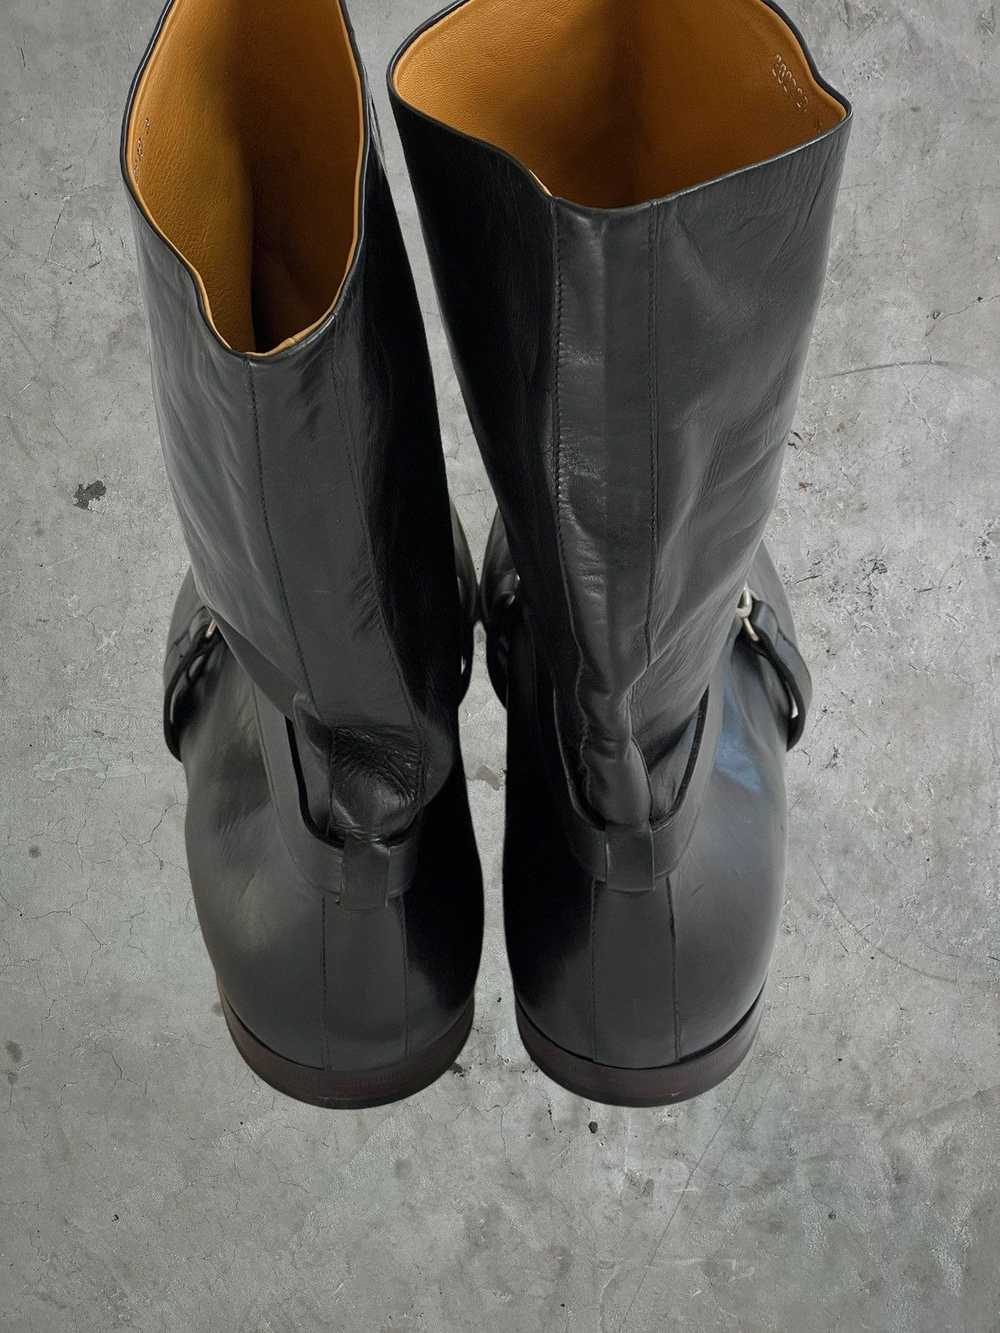 Gucci Gucci Leather Buckle Boots - image 6